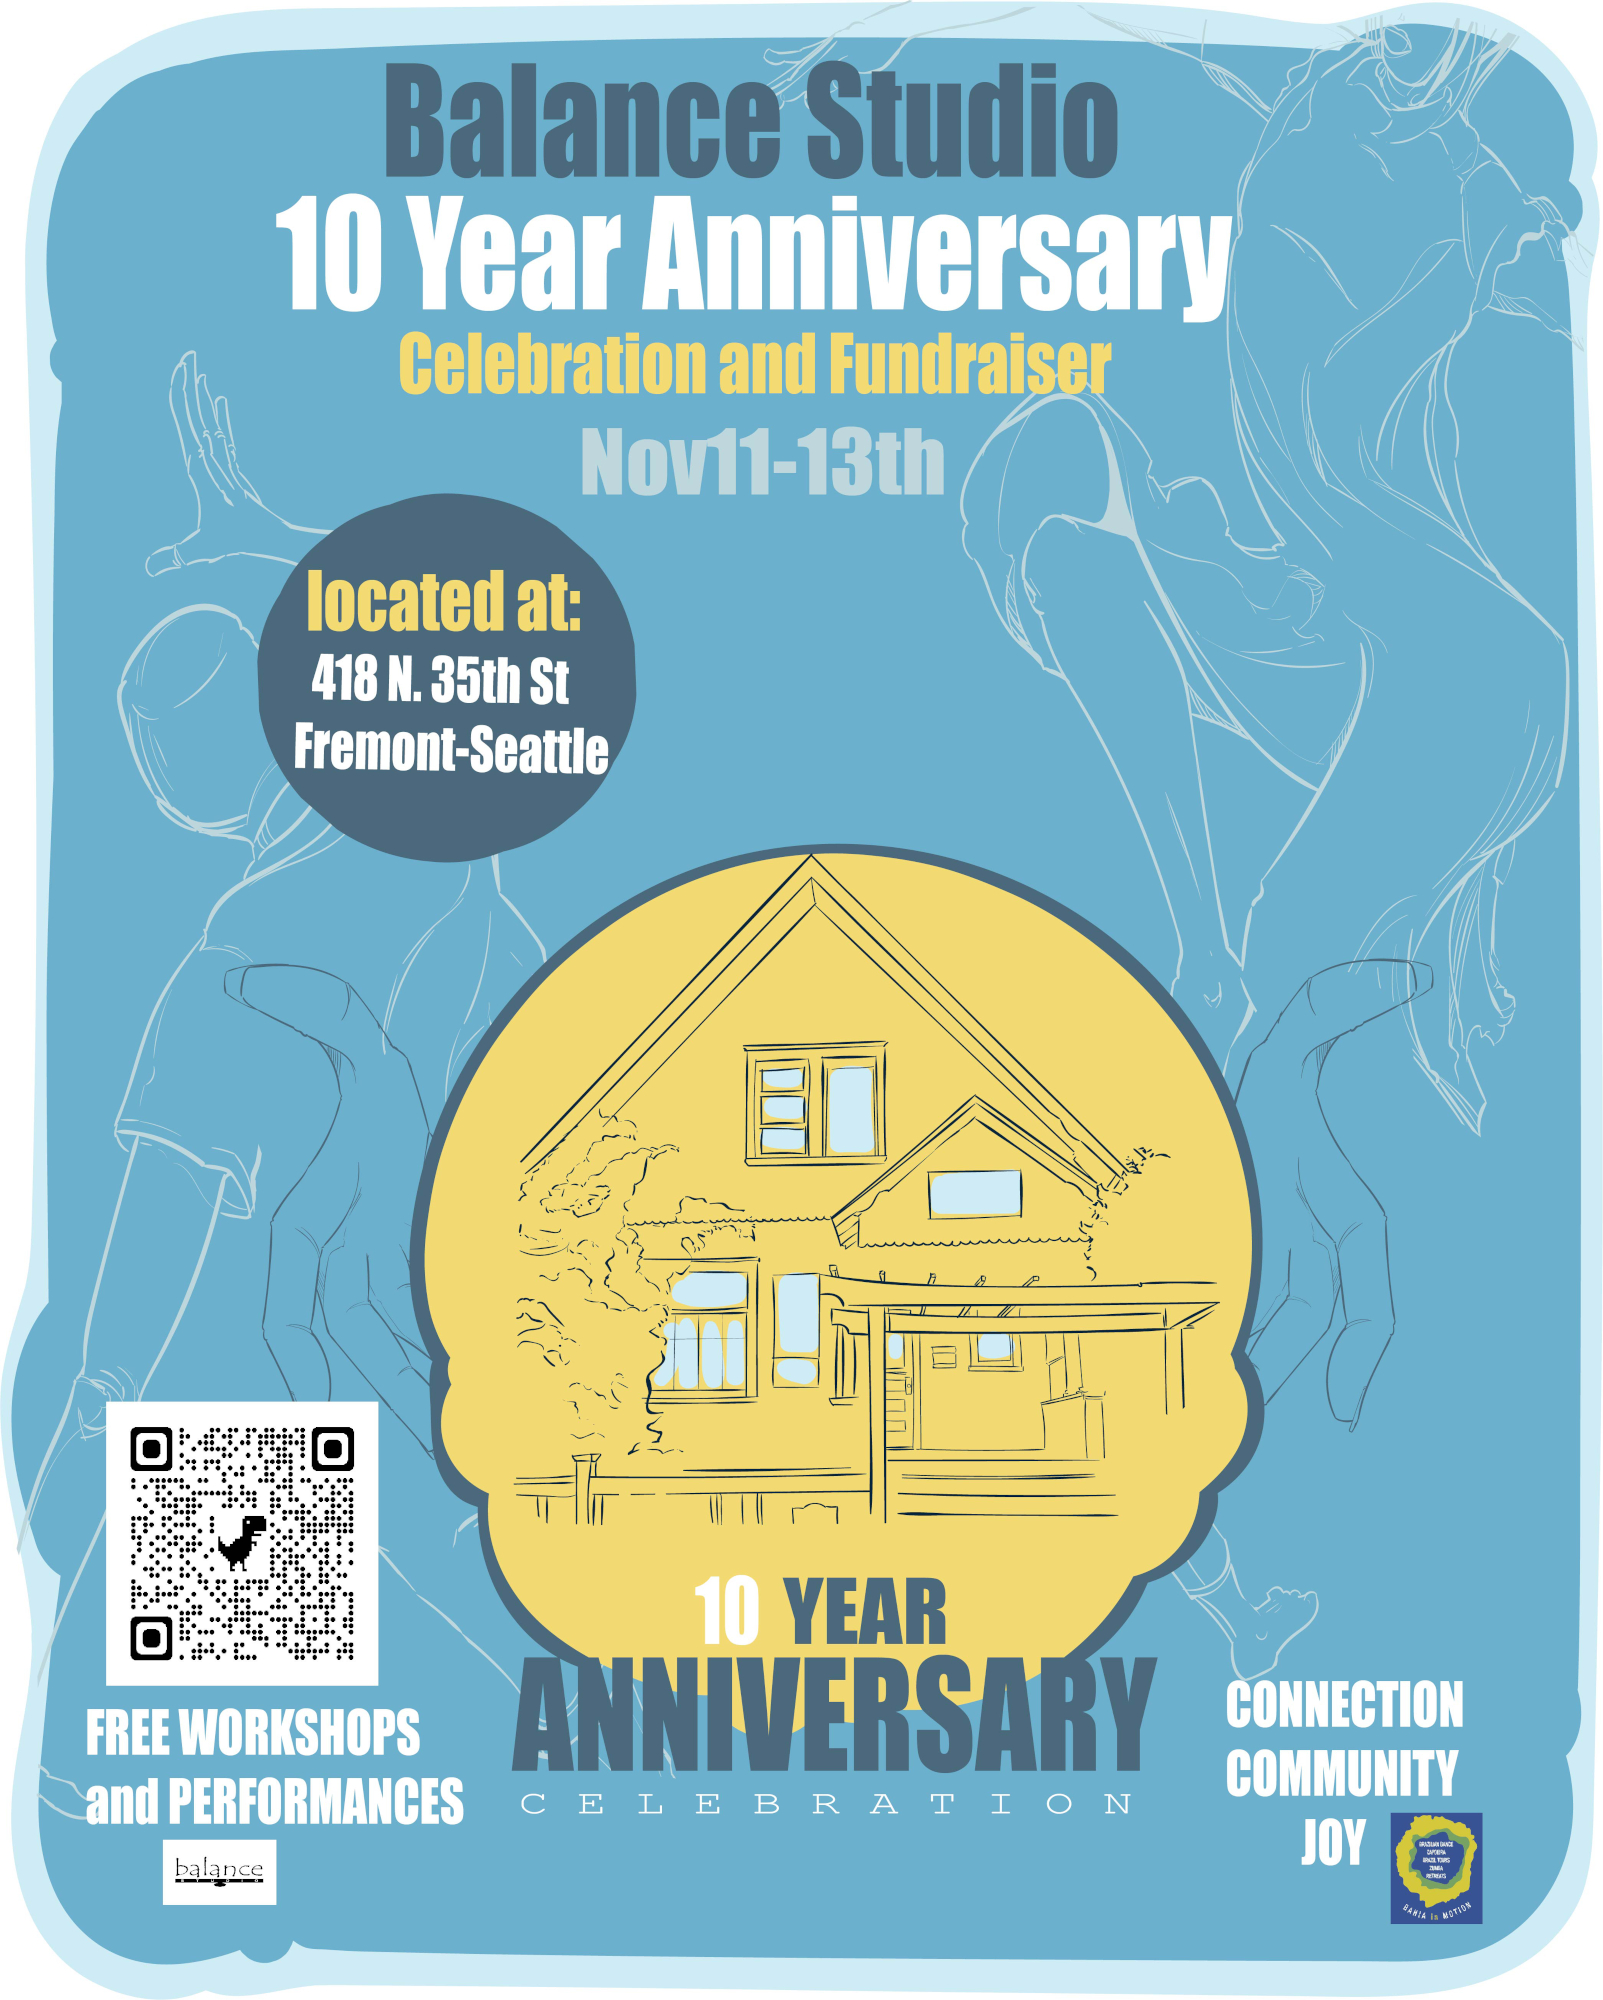 10 Year Anniversary Celebration and Fundraiser